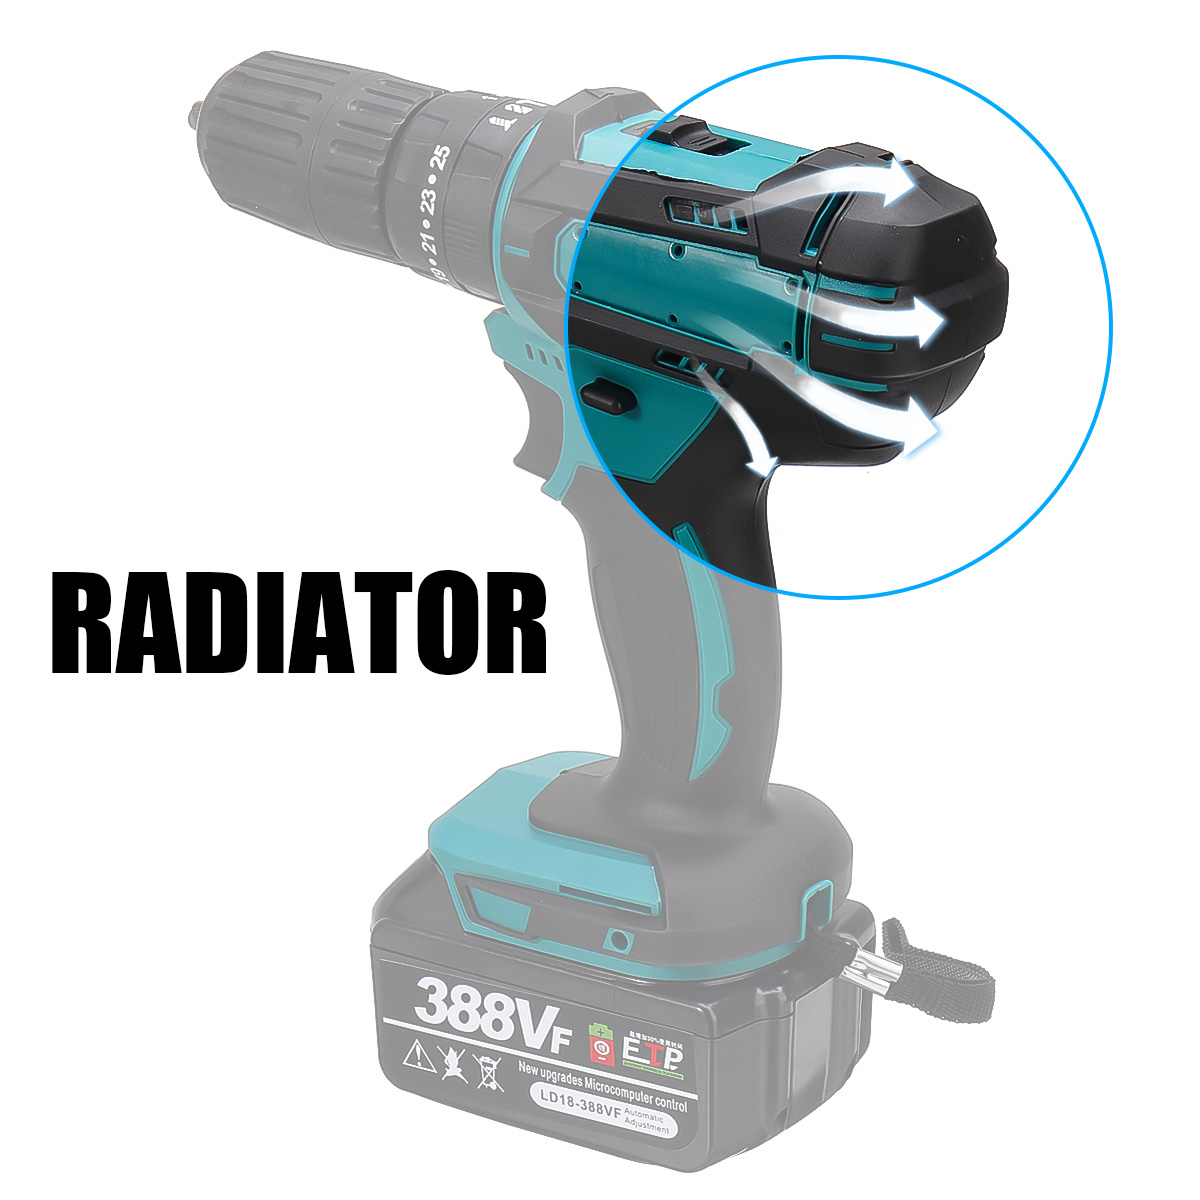 388VF-1500W-Electric-Cordless-Impact-Drill-LED-Working-Light-Rechargeable-Woodworking-Maintenance-To-1920355-5